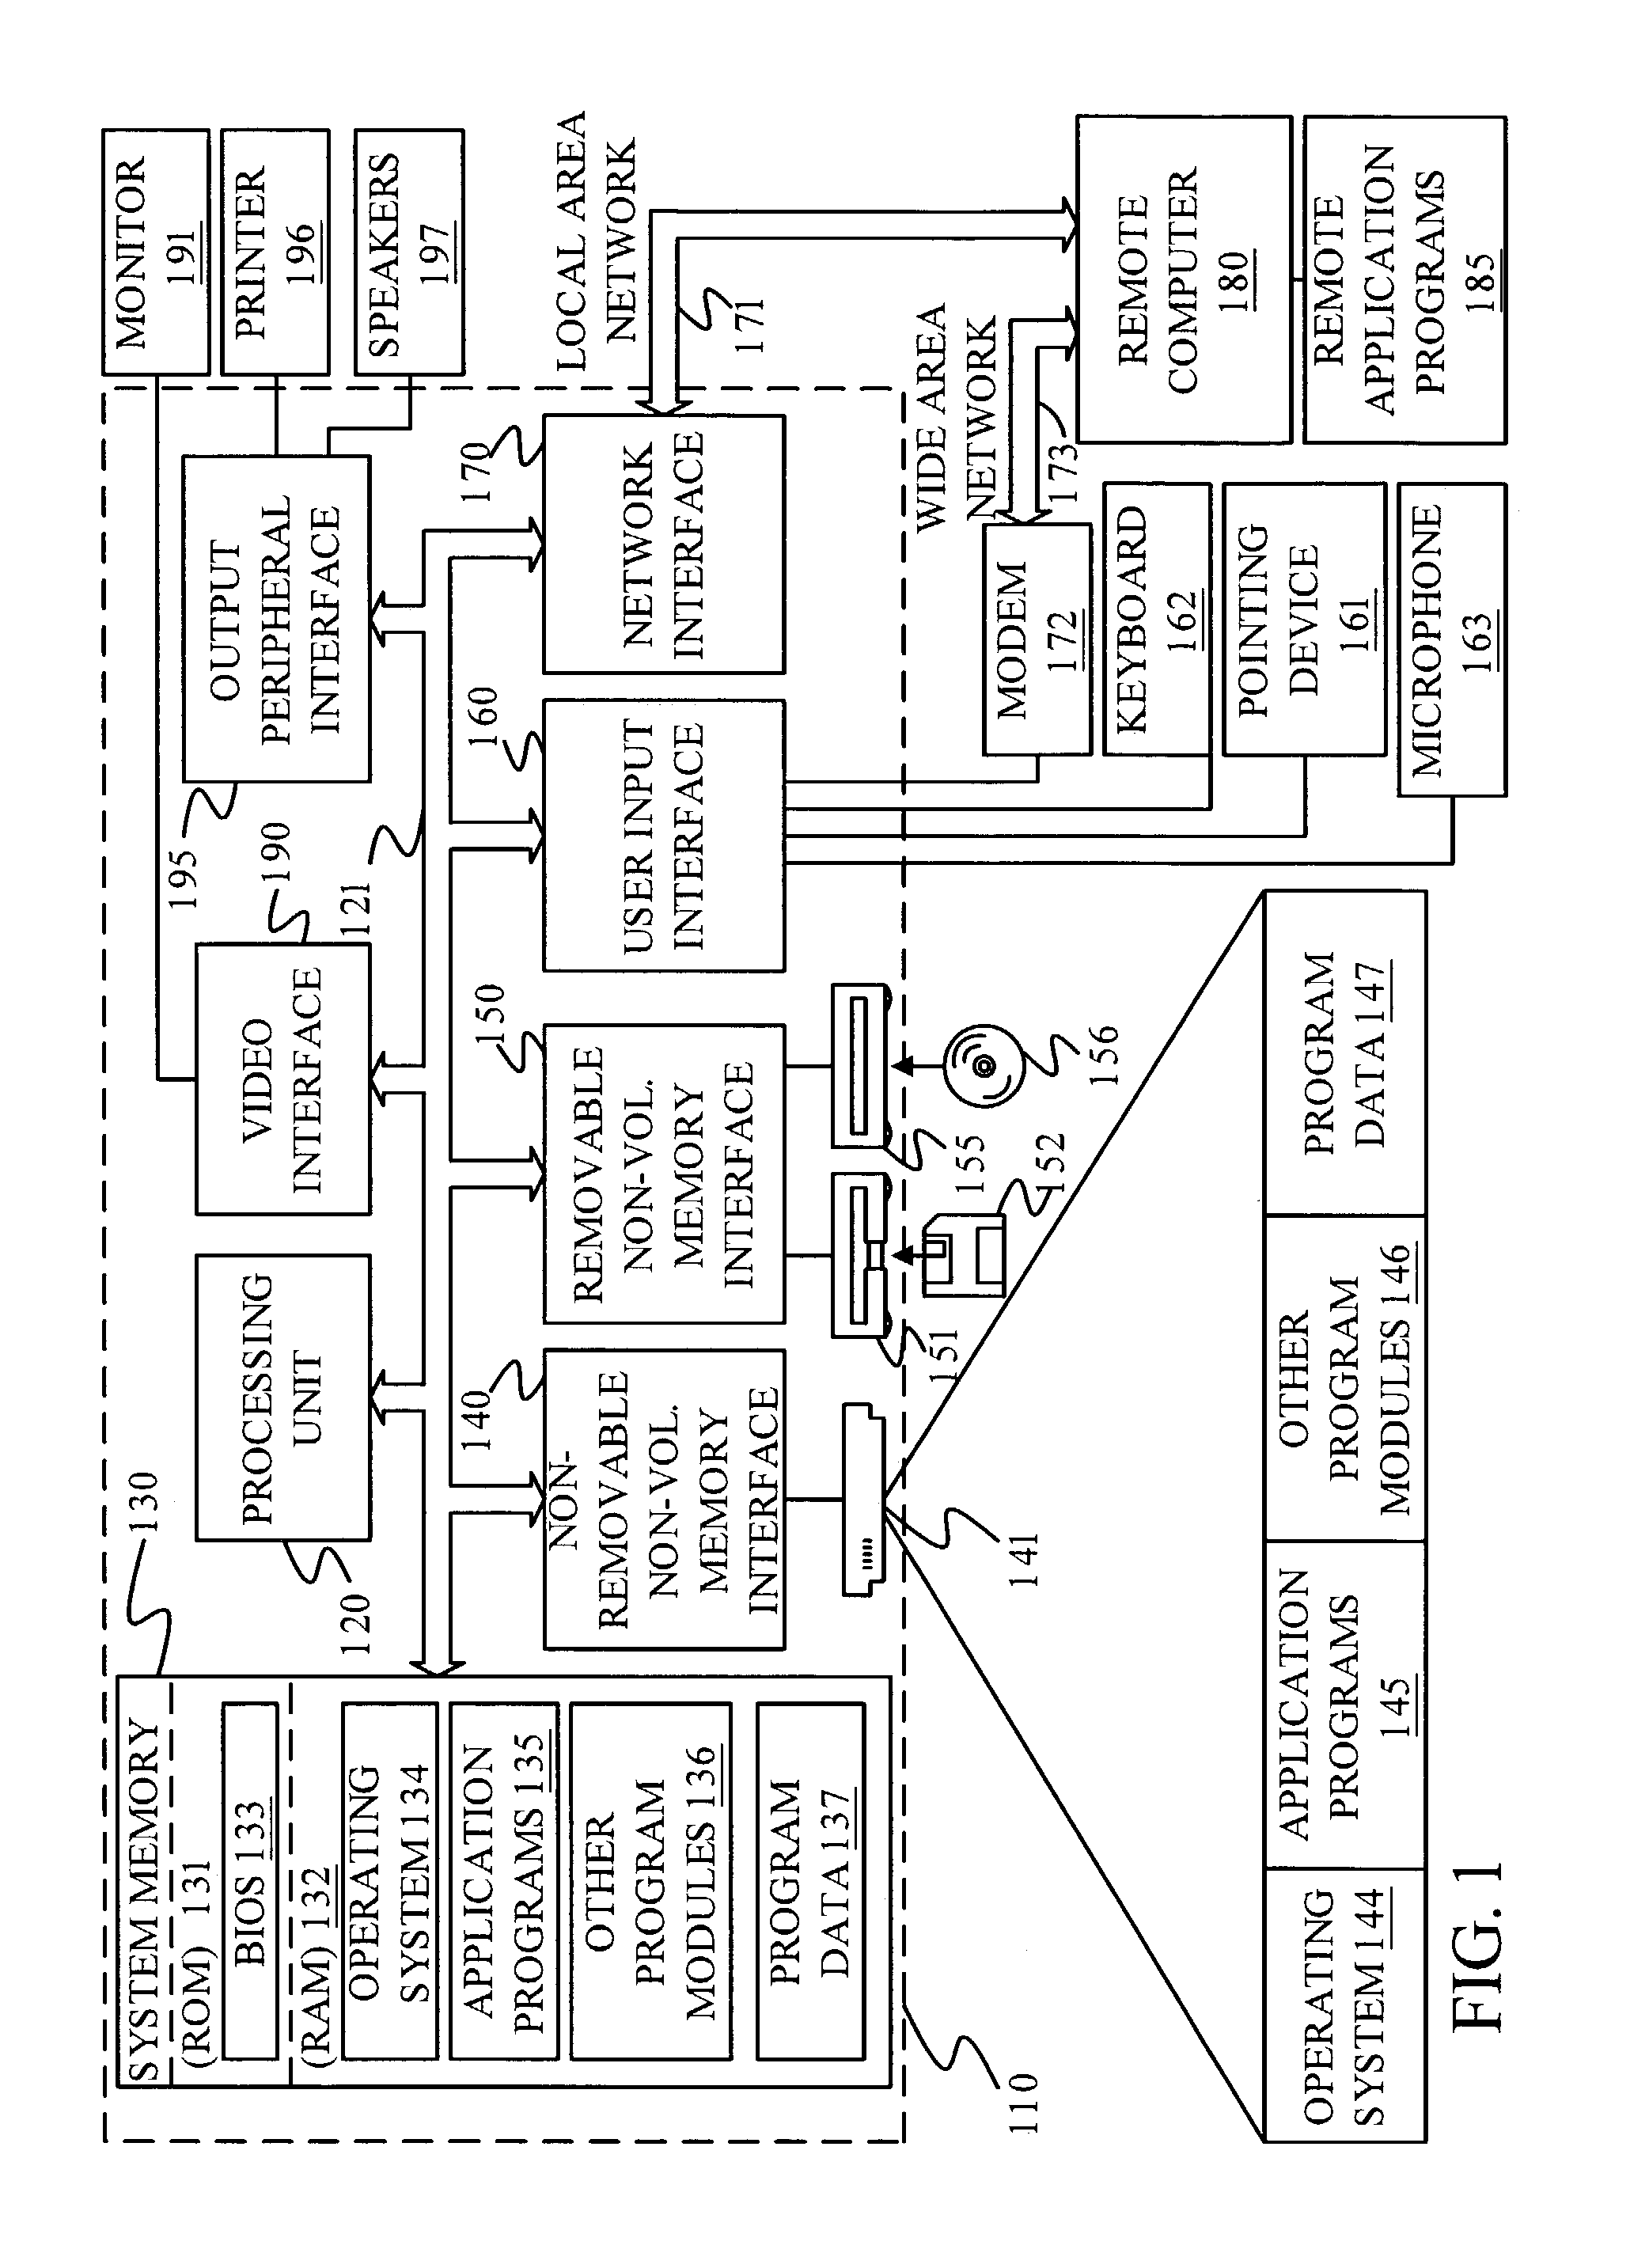 Automatic generation of a dimensional model for business analytics from an object model for online transaction processing